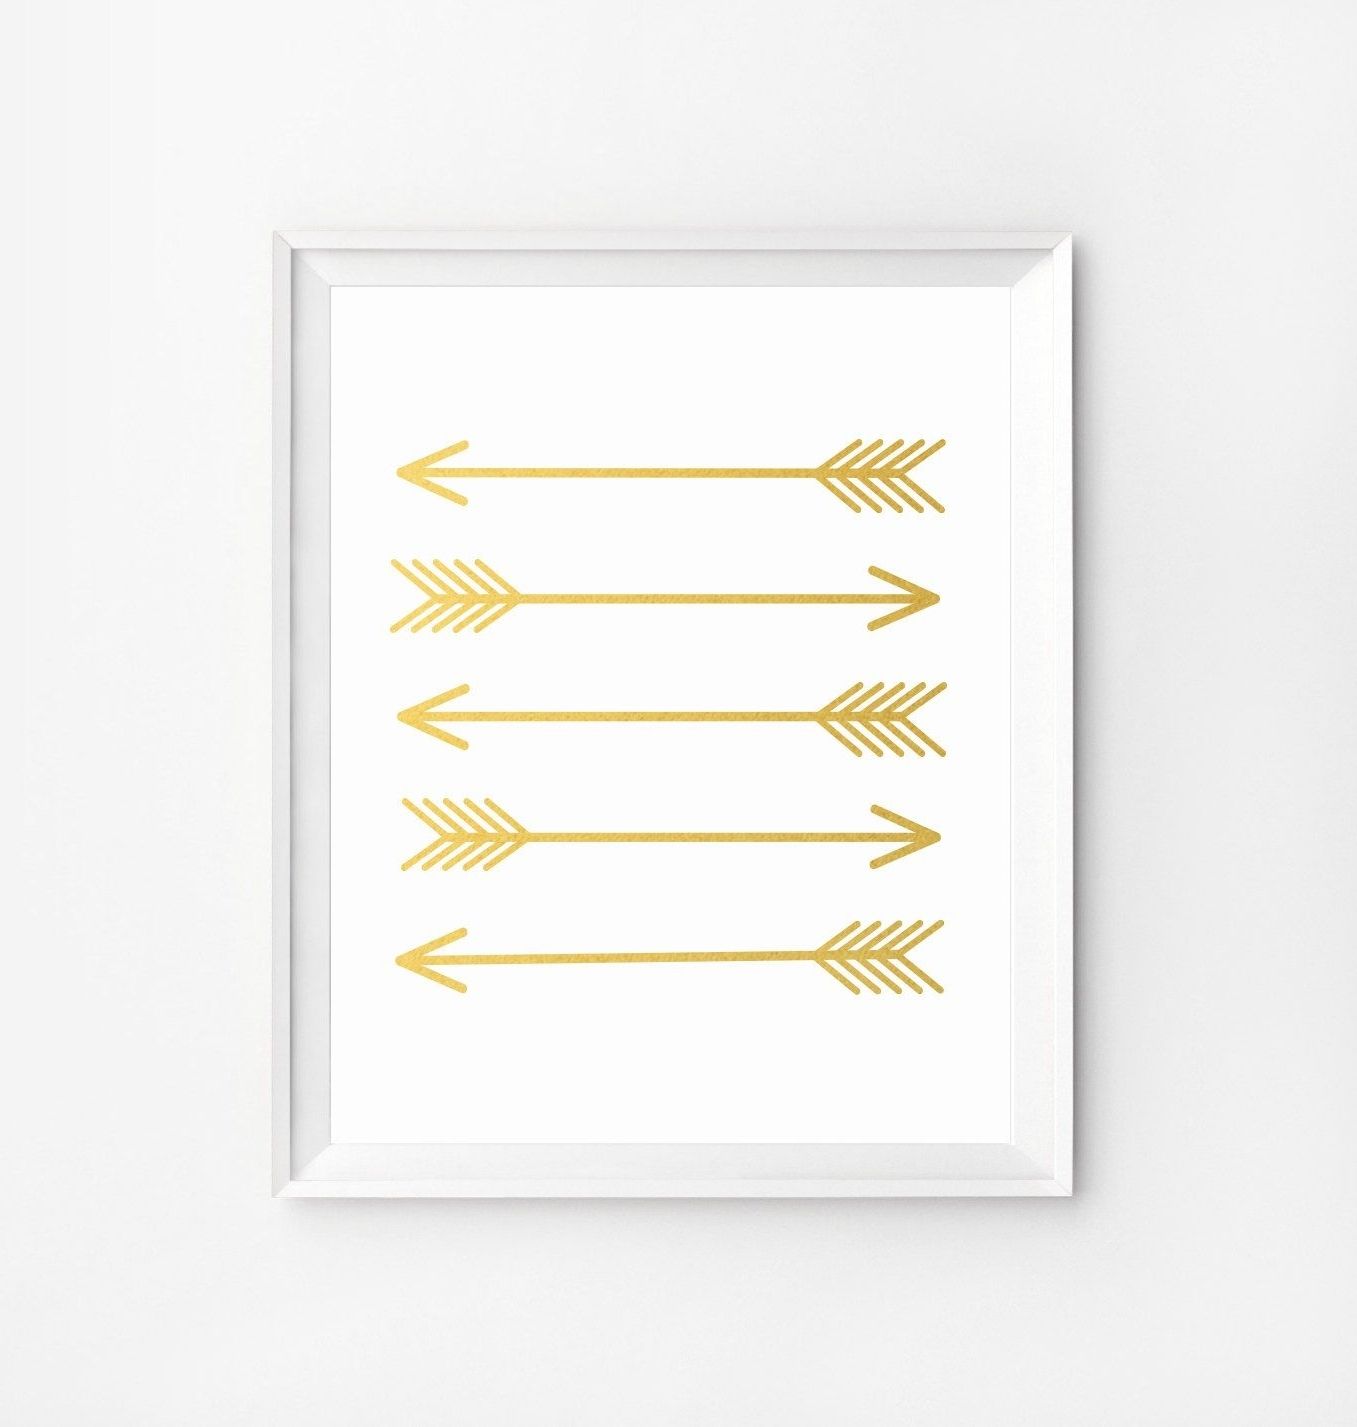 Arrow Wall Art Intended For Preferred Gold Wall Art, Arrow Wall Decor, Gold Arrow Art Print, Arrow Print (View 19 of 20)